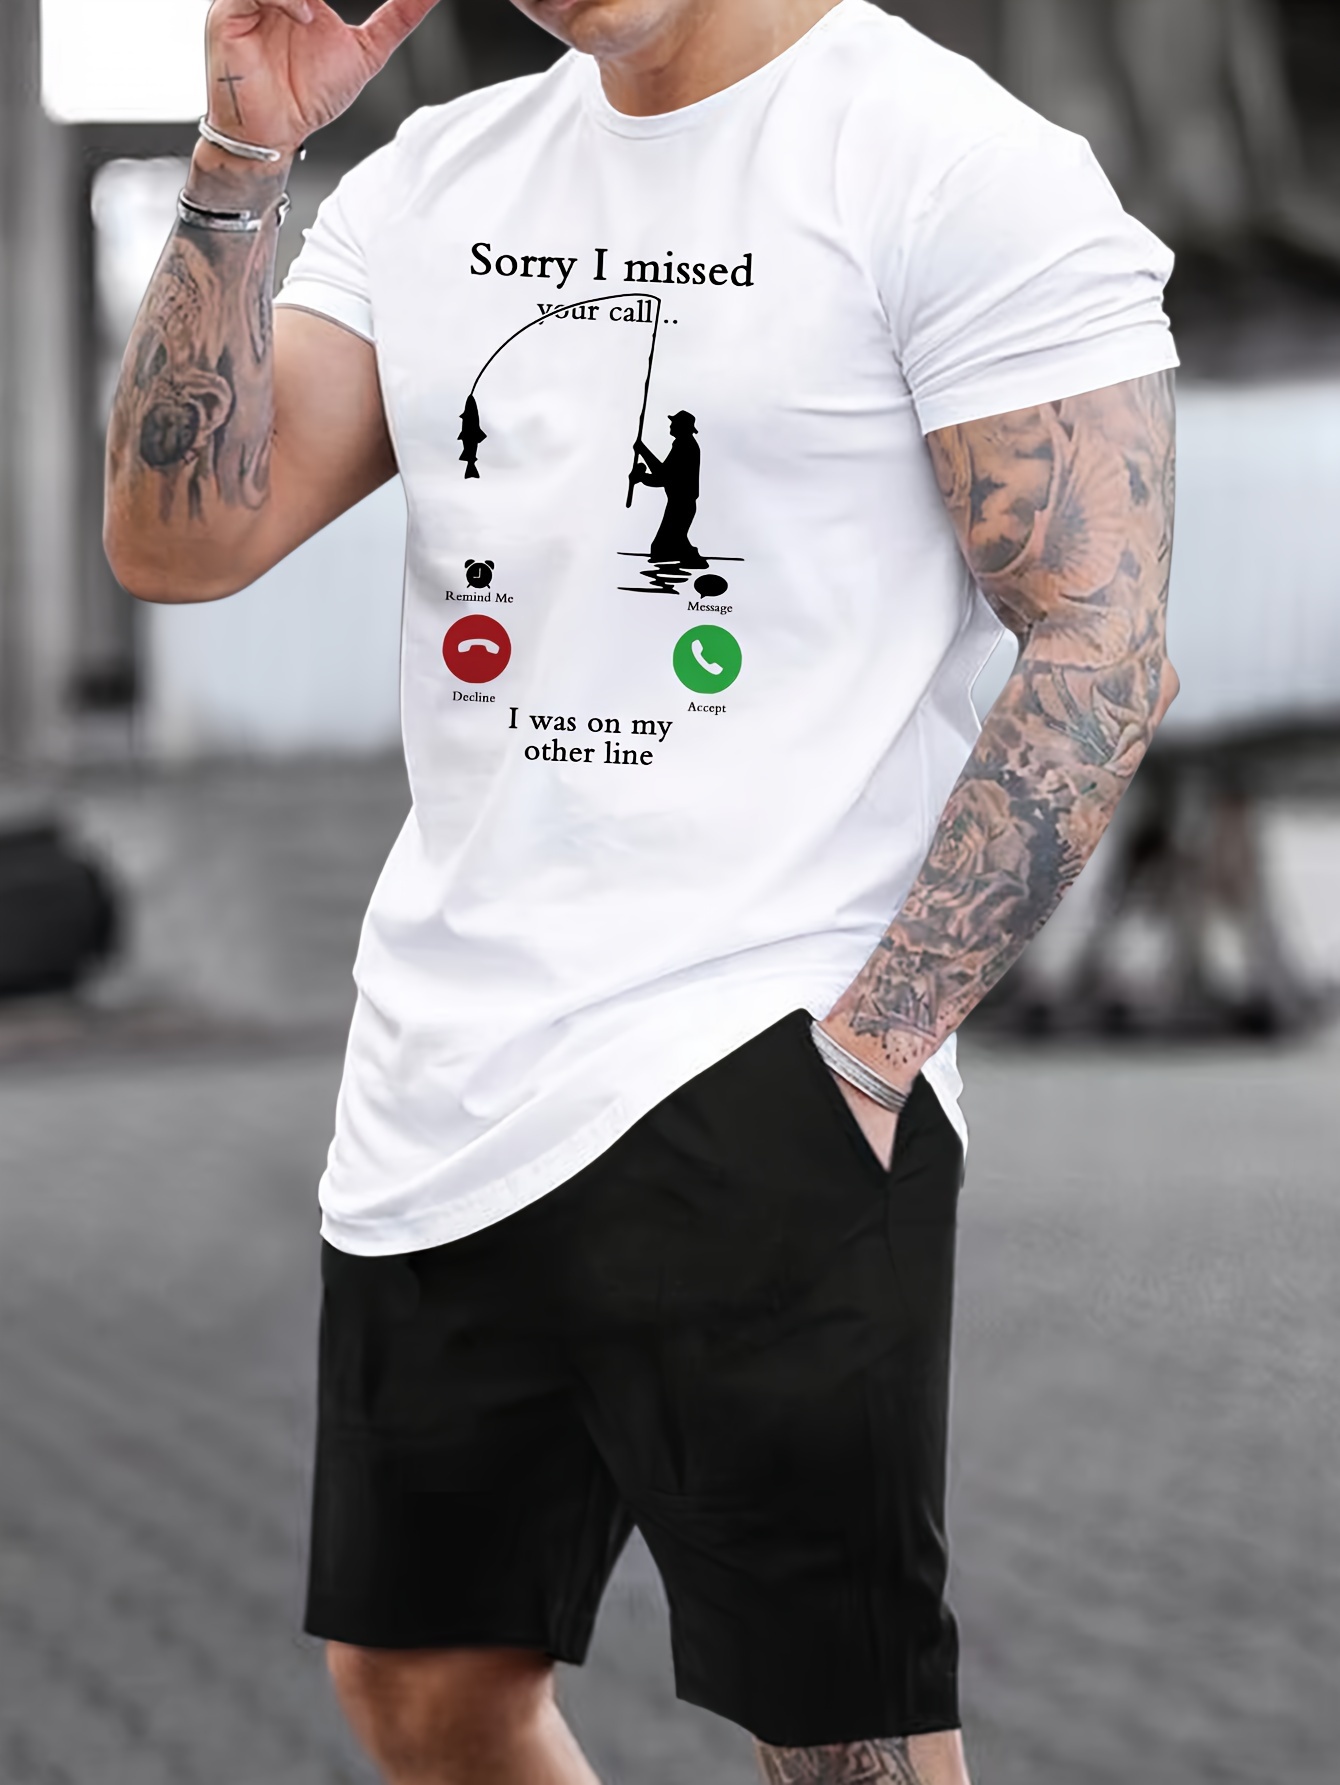 Funny Fishing T Shirt Sorry I Missed Your Call I Was On The Other Line  Angling - Black / S